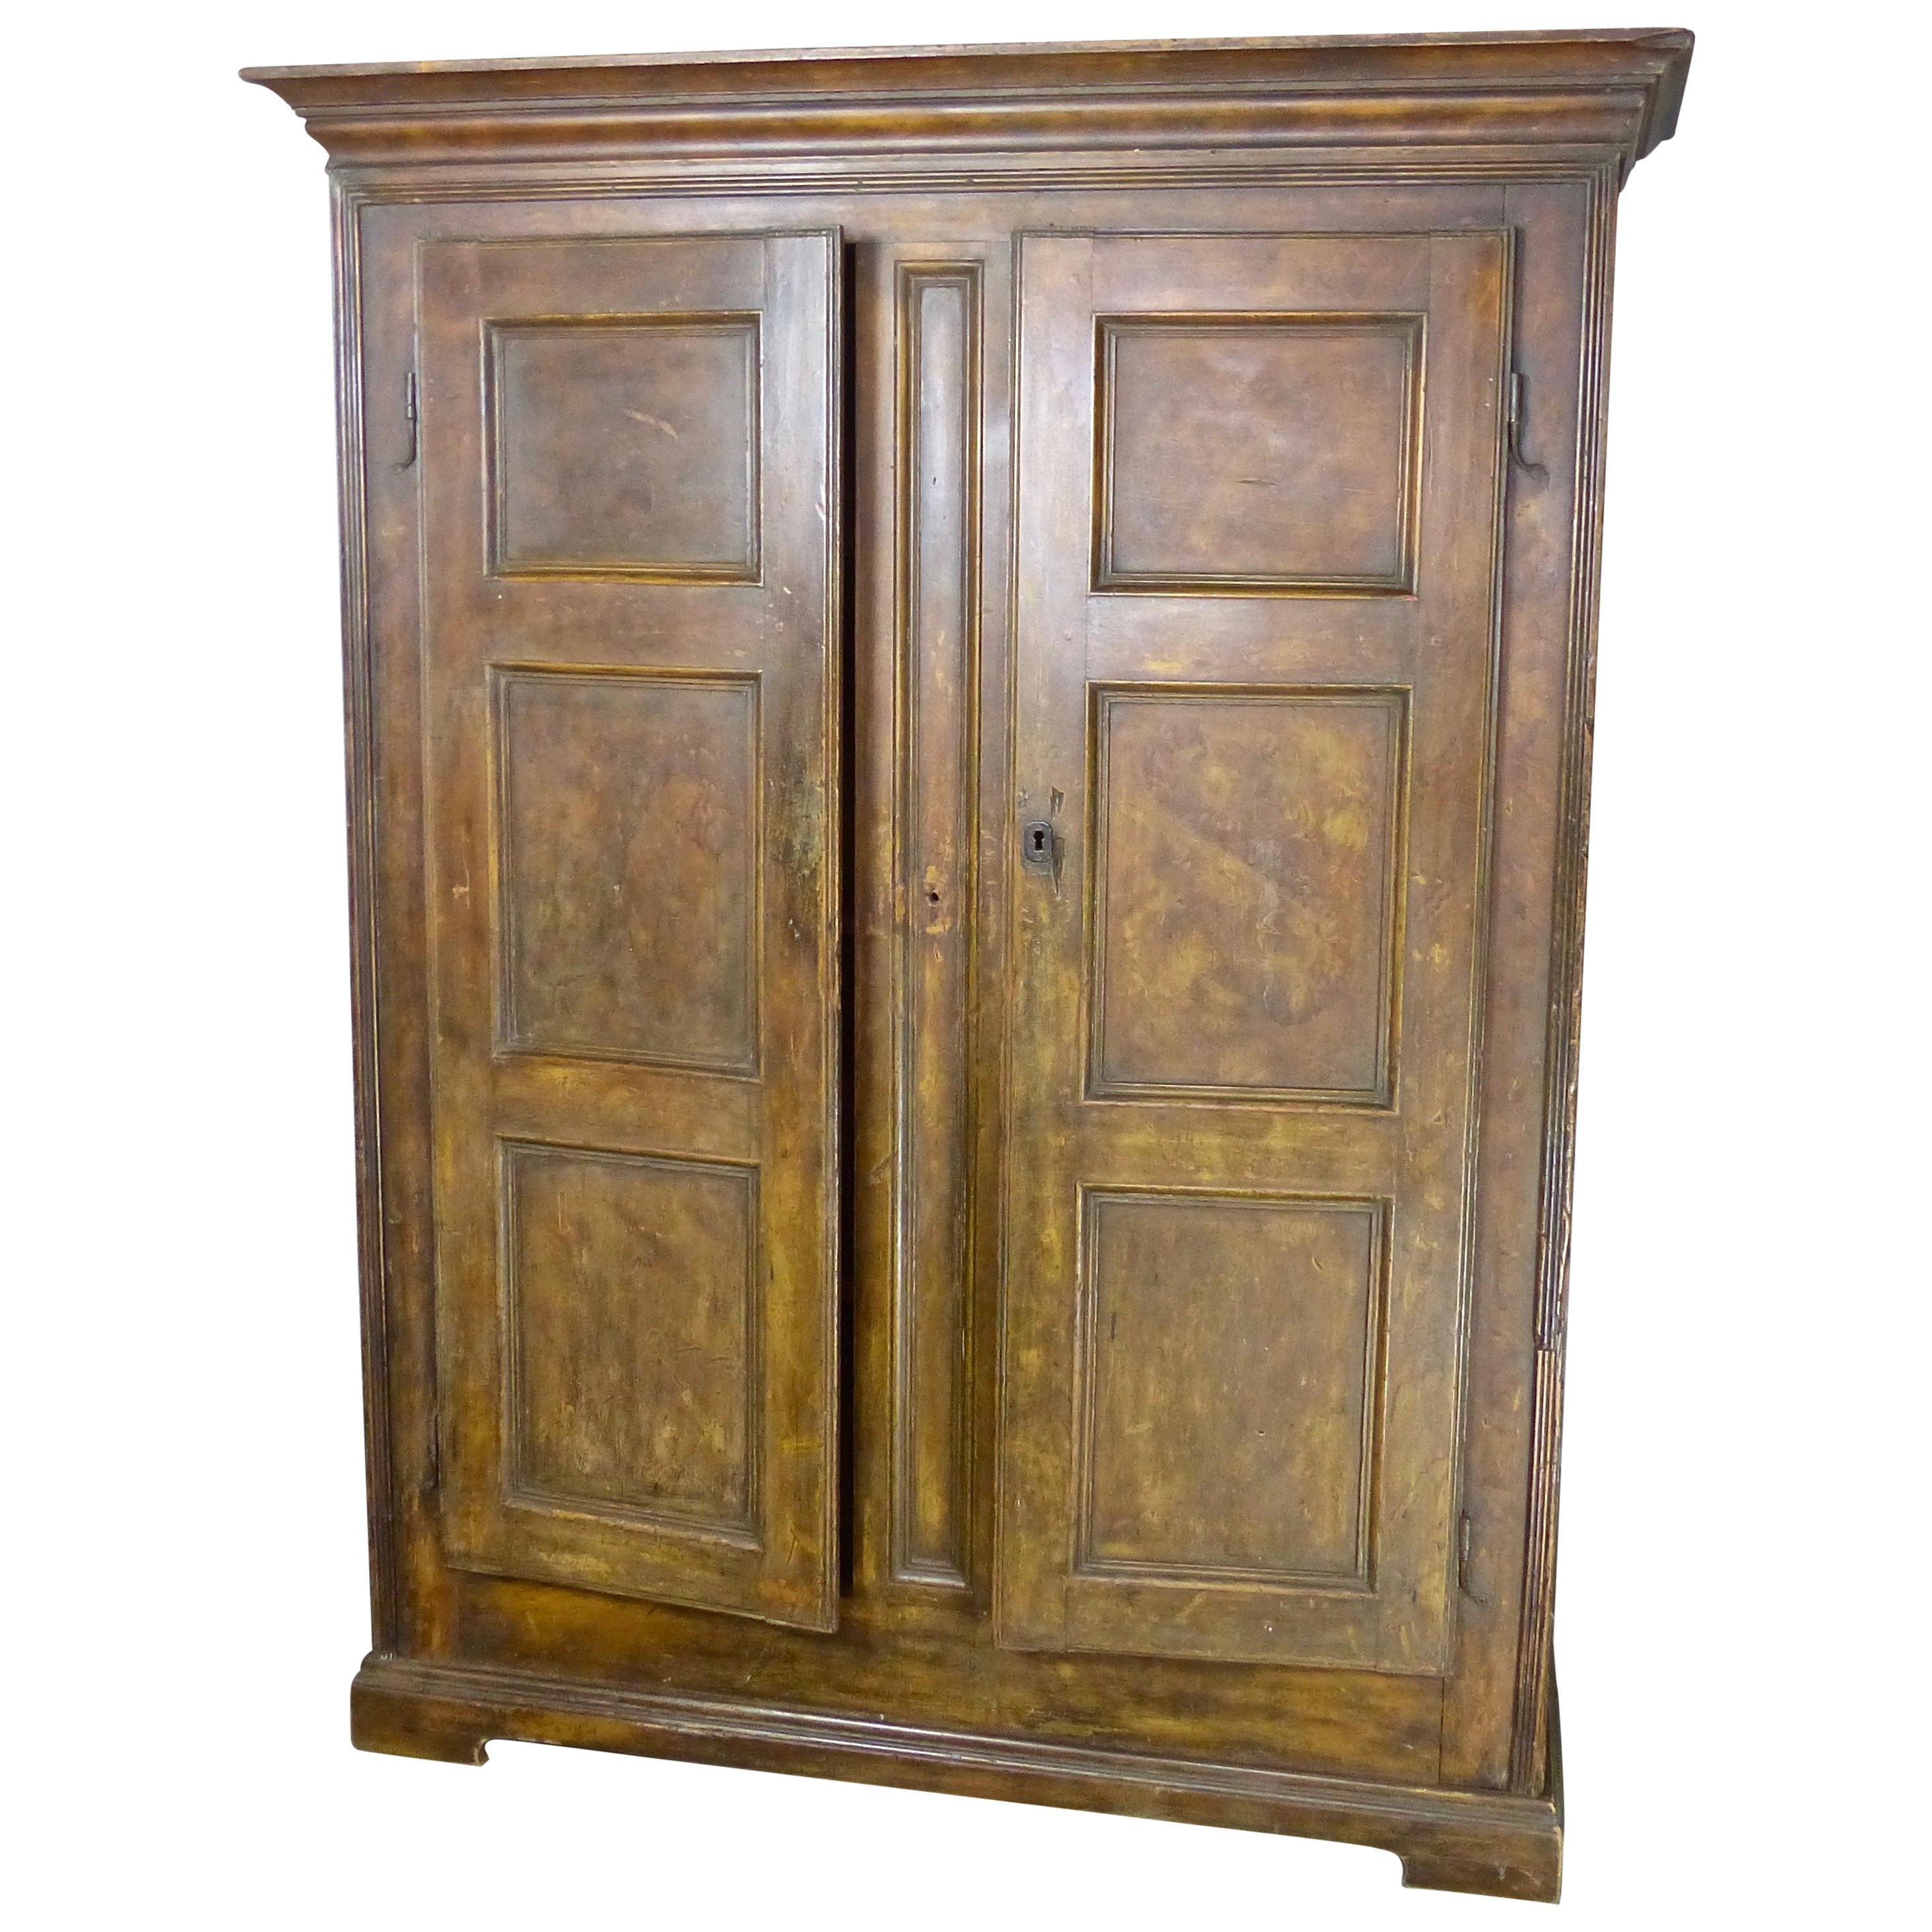 1820 Rat-Tail Quebec Pine Armoire with Hand Painted Burled Oak Faux Finish